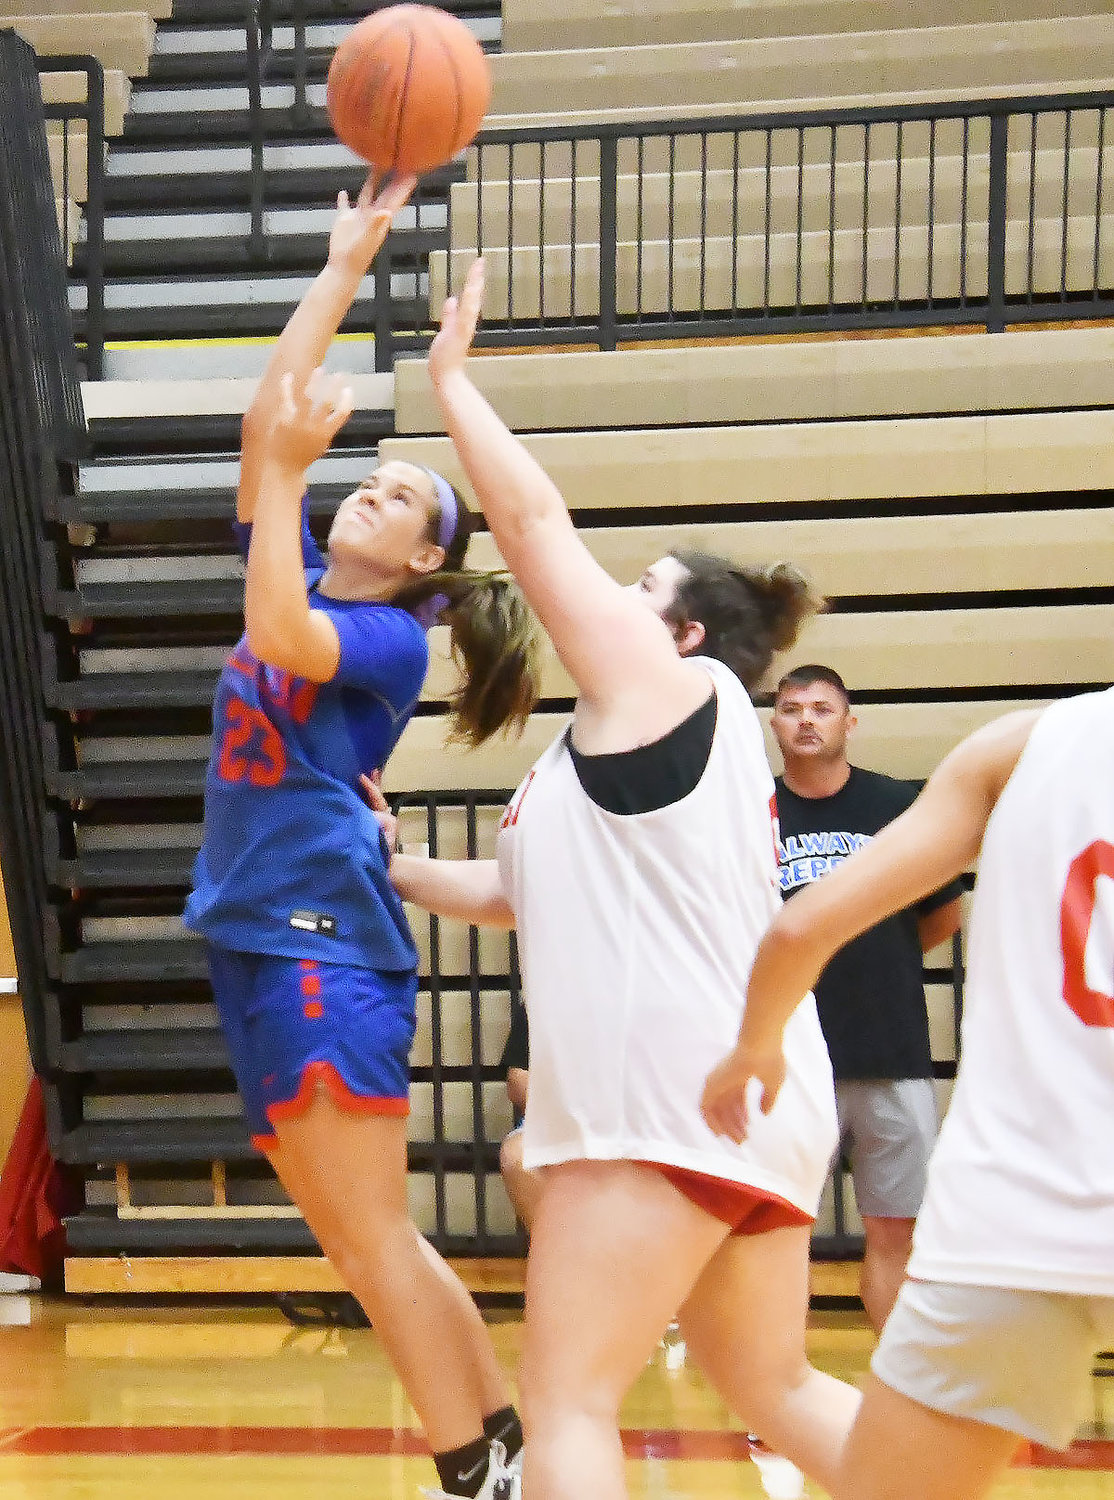 Moberly's Kennedy Messer moves inside for a layup while playing Chillicothe in a scrimmage. Messer scored on the play.